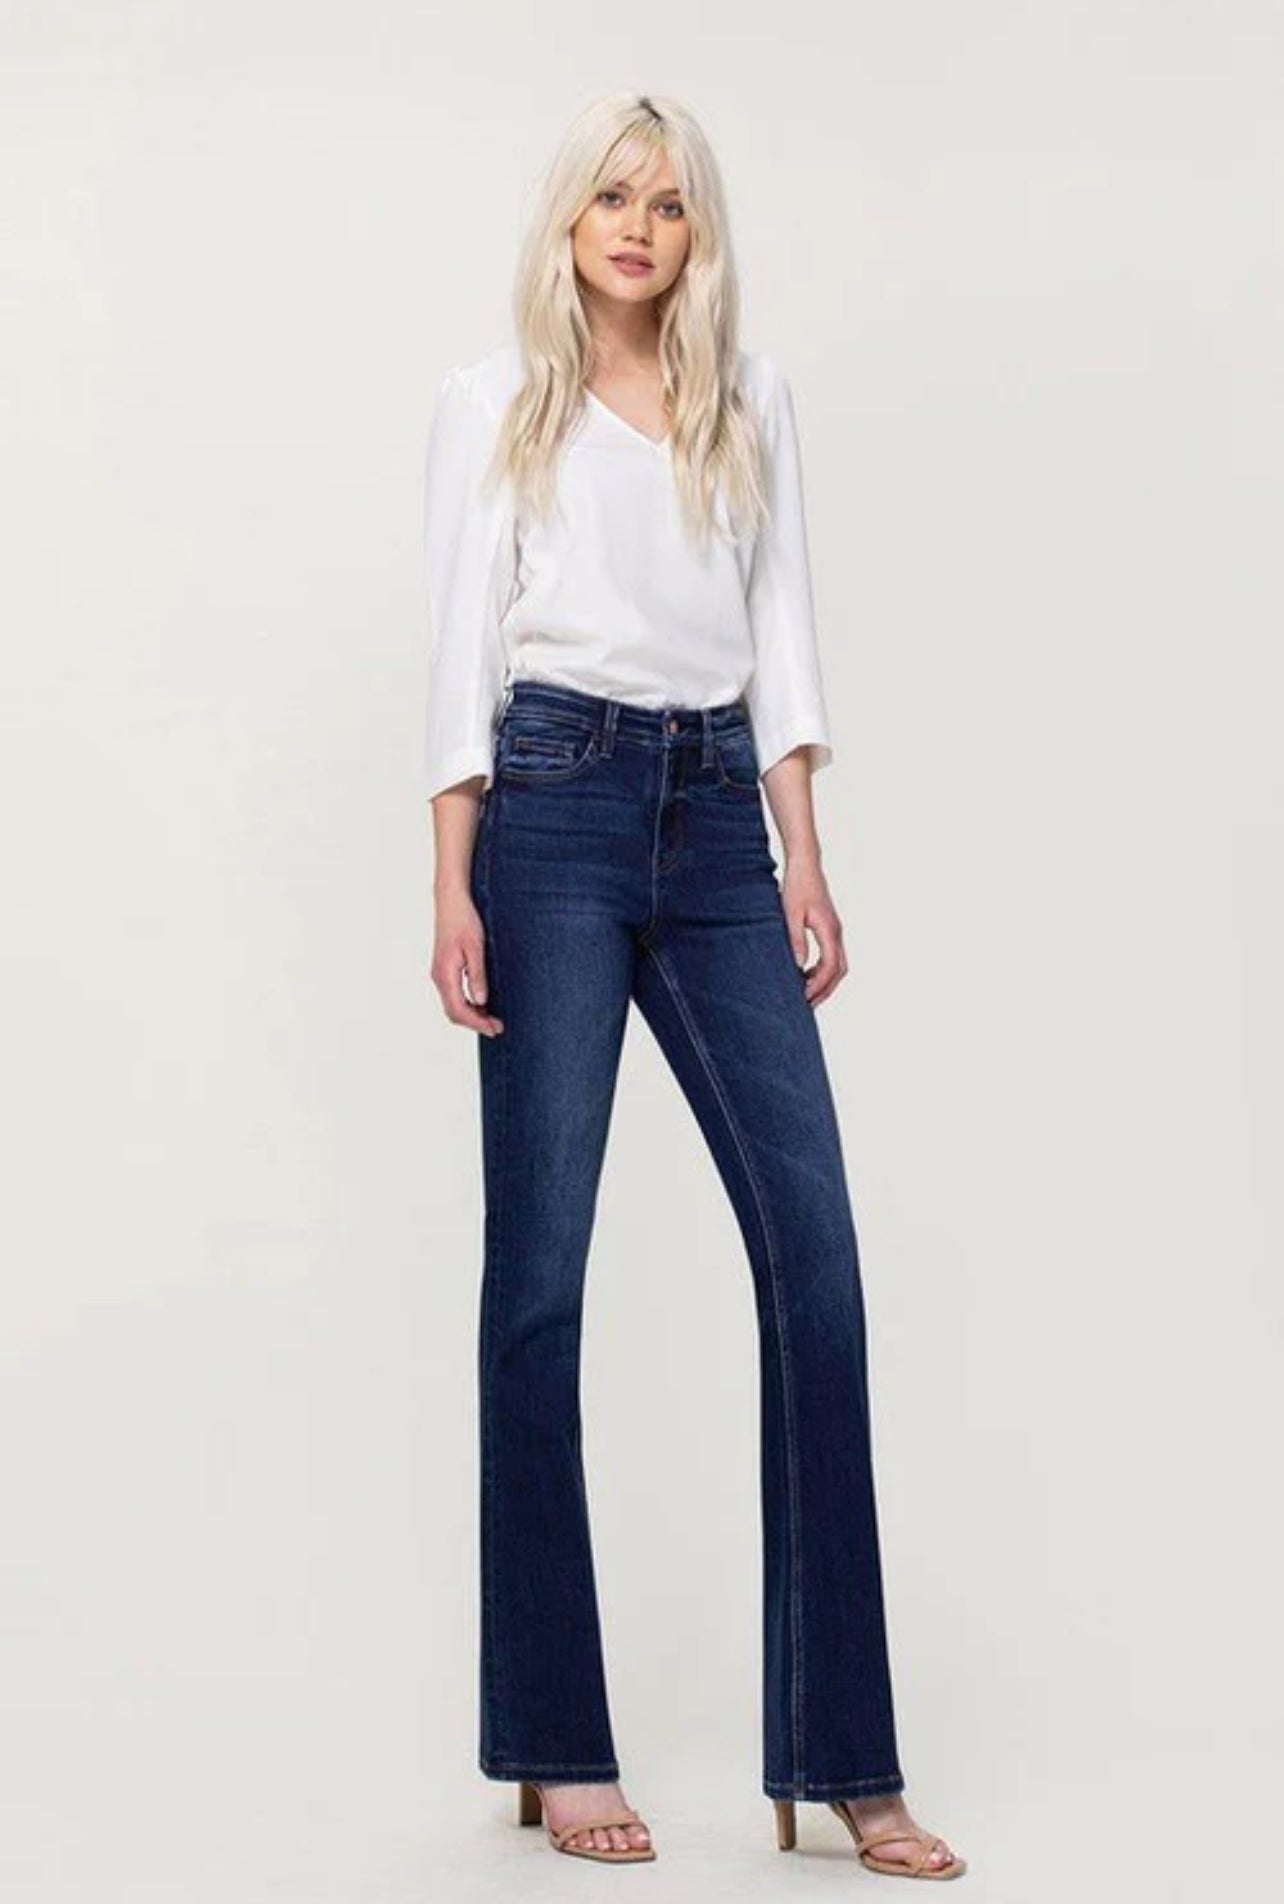 Tell My Story HR Bootcut Jeans